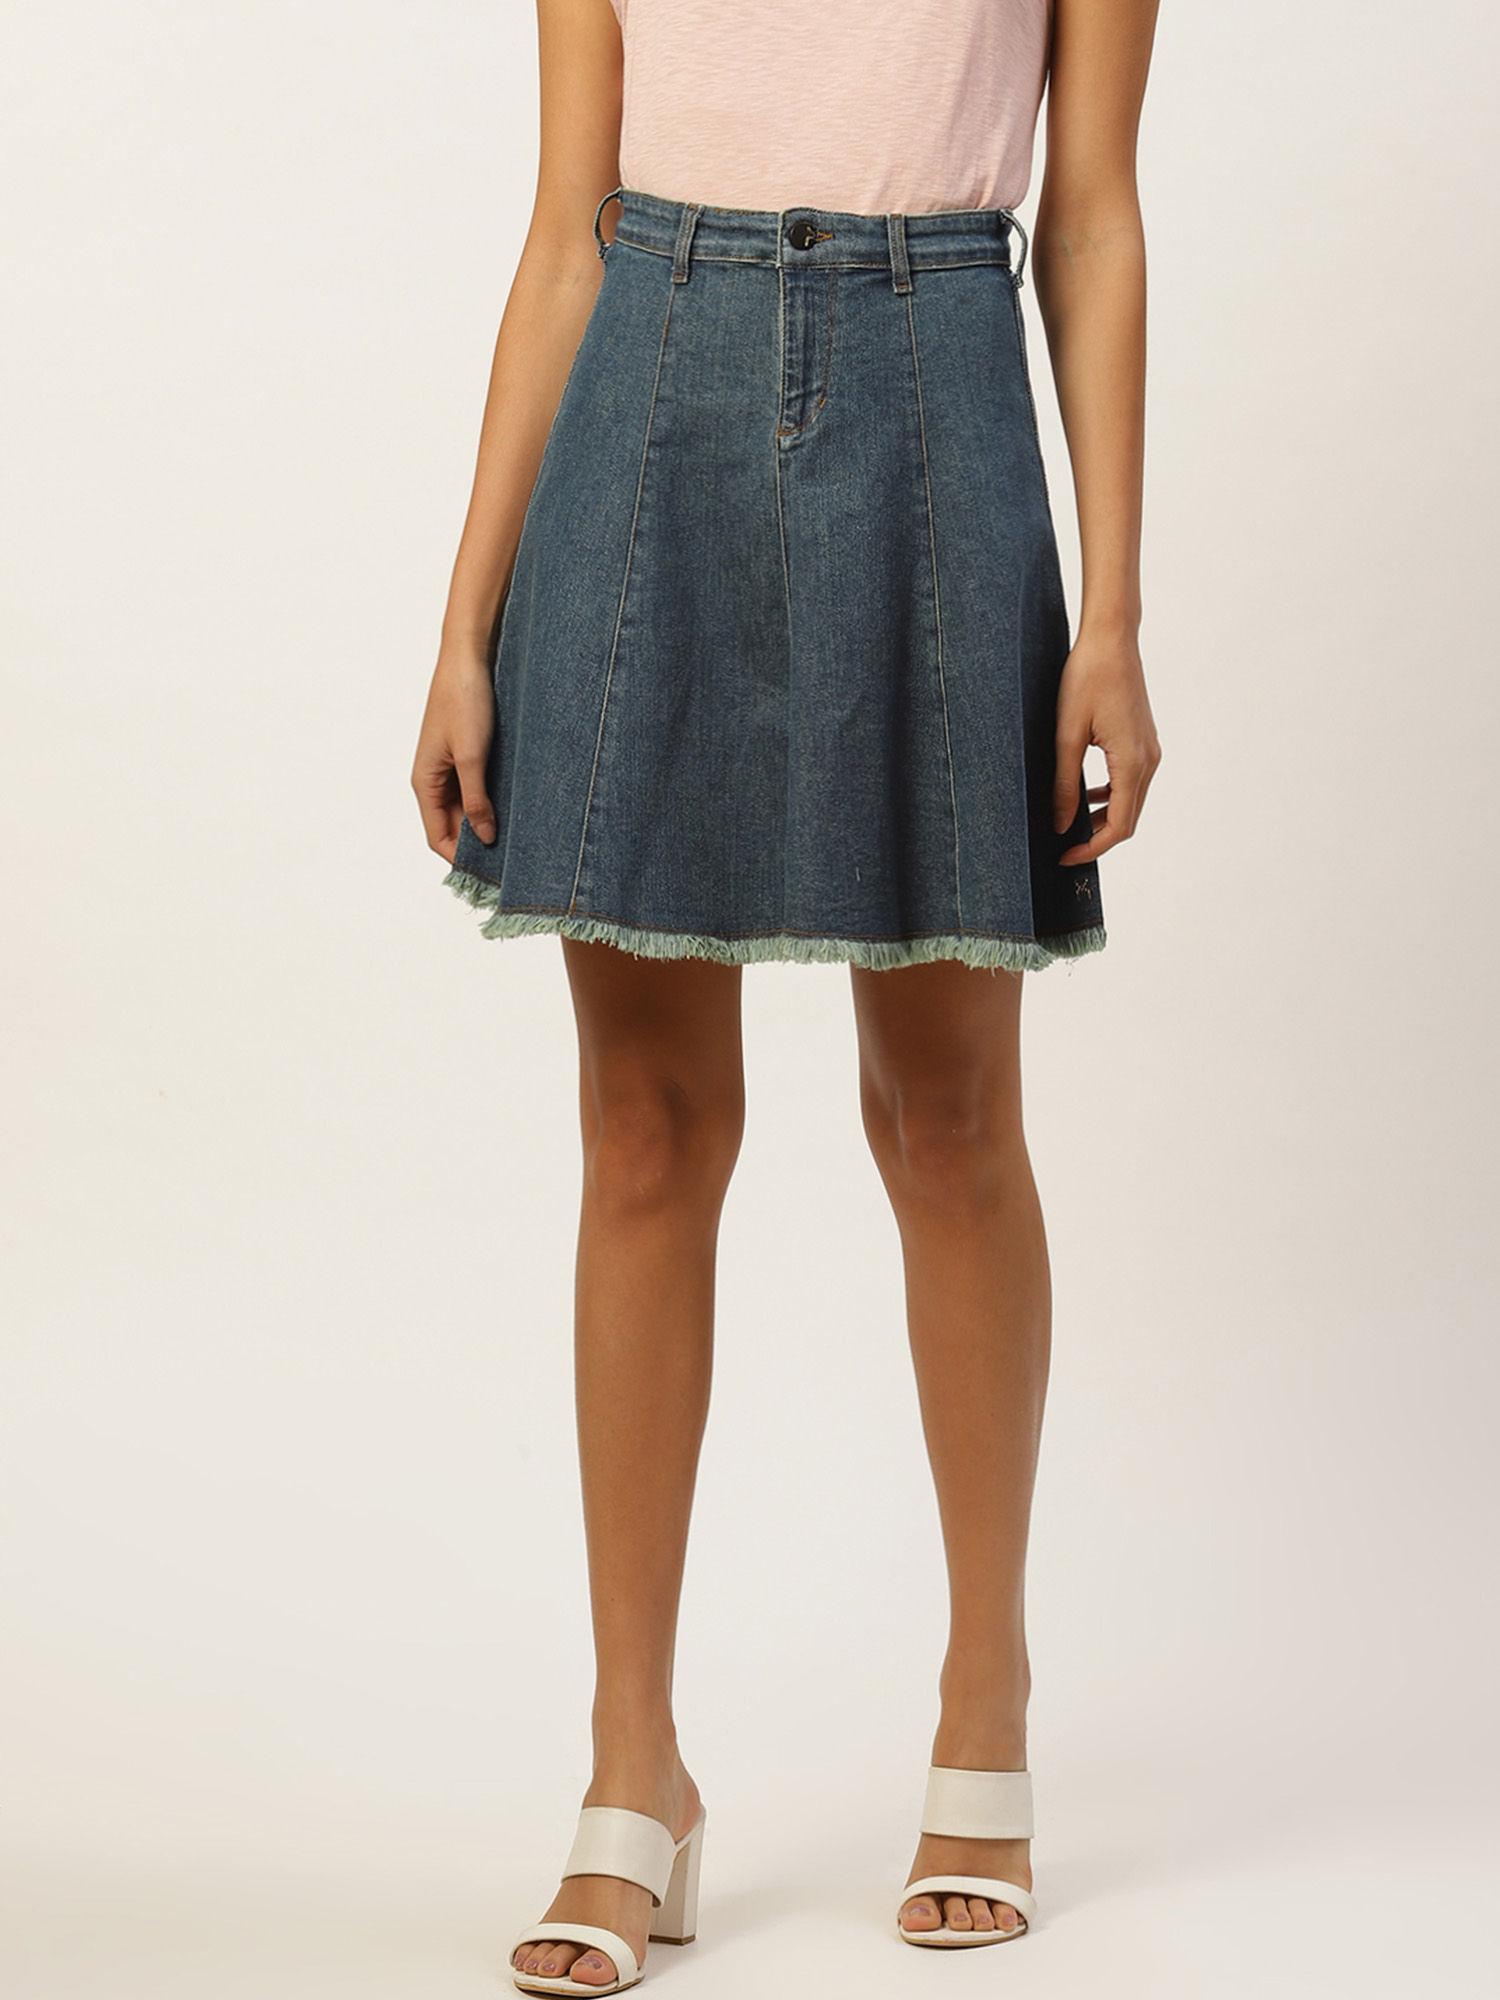 navy blue washed high-rise denim stretchable a-line skirt